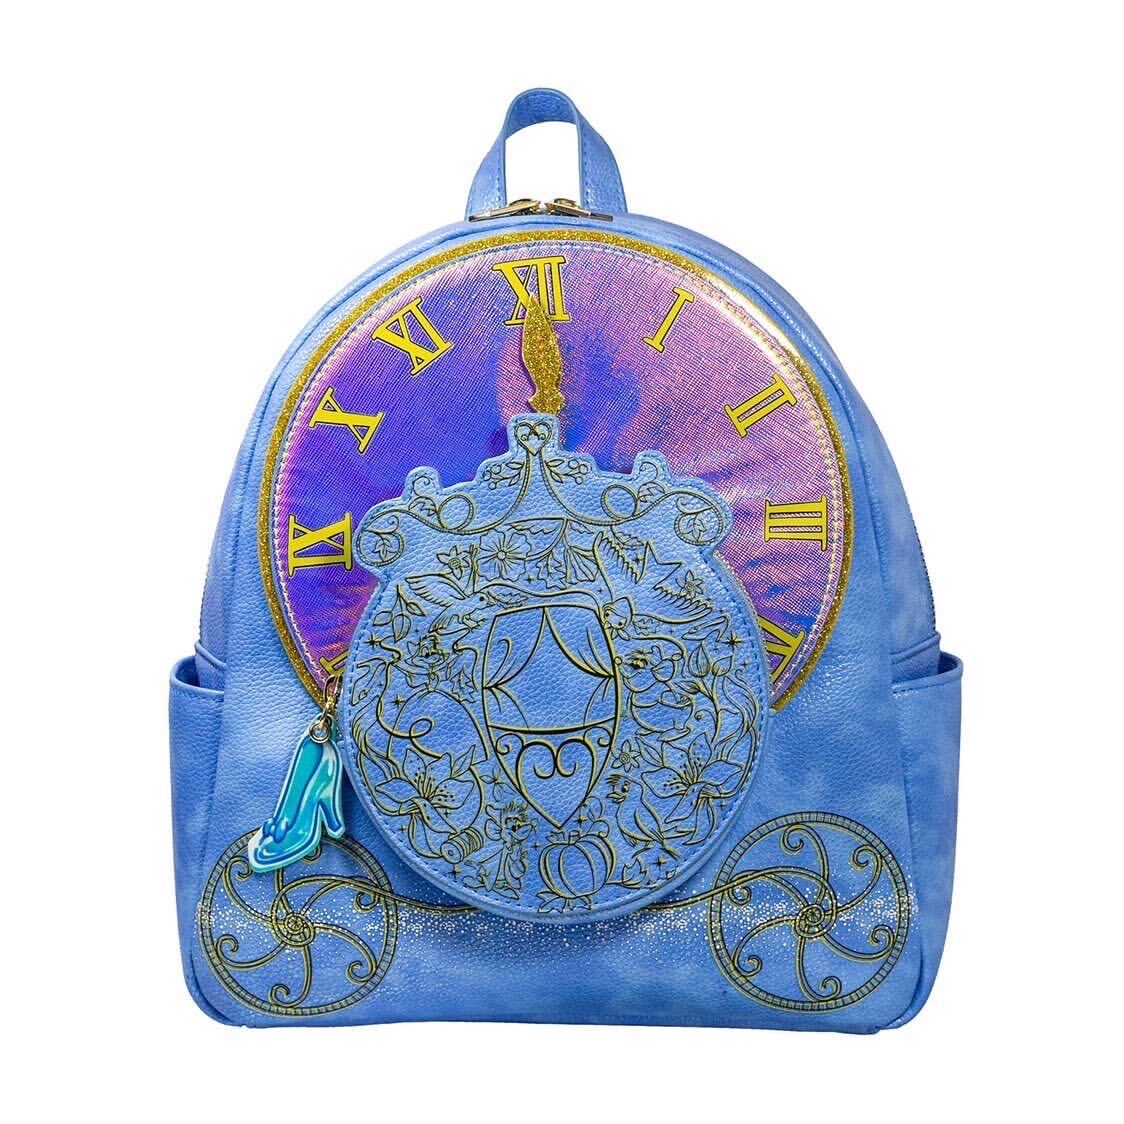 This New Disney X Danielle Nicole Backpack is Perfect for